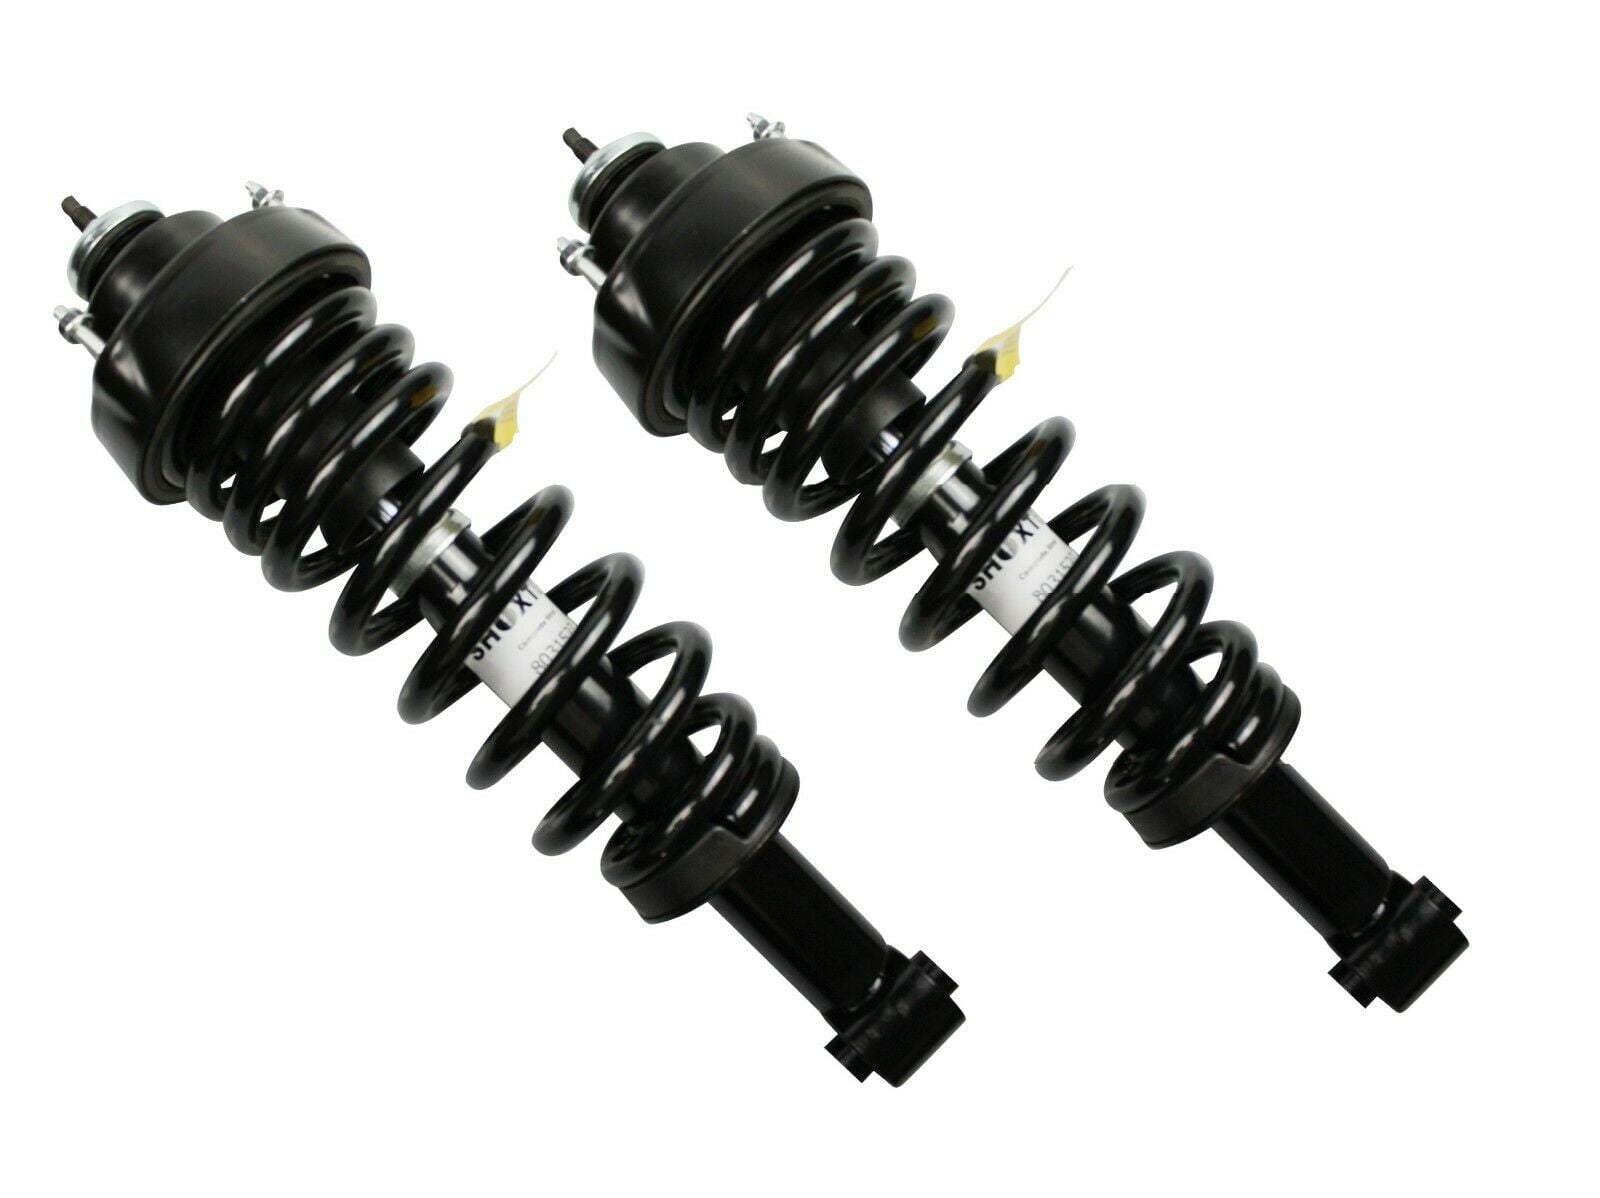 Detroit Axle 2002-2005 Mercury Mountaineer Pair Rear Strut & Coil Spring Assembly for 2002 2003 2004 2005 Ford Explorer 4-Door 